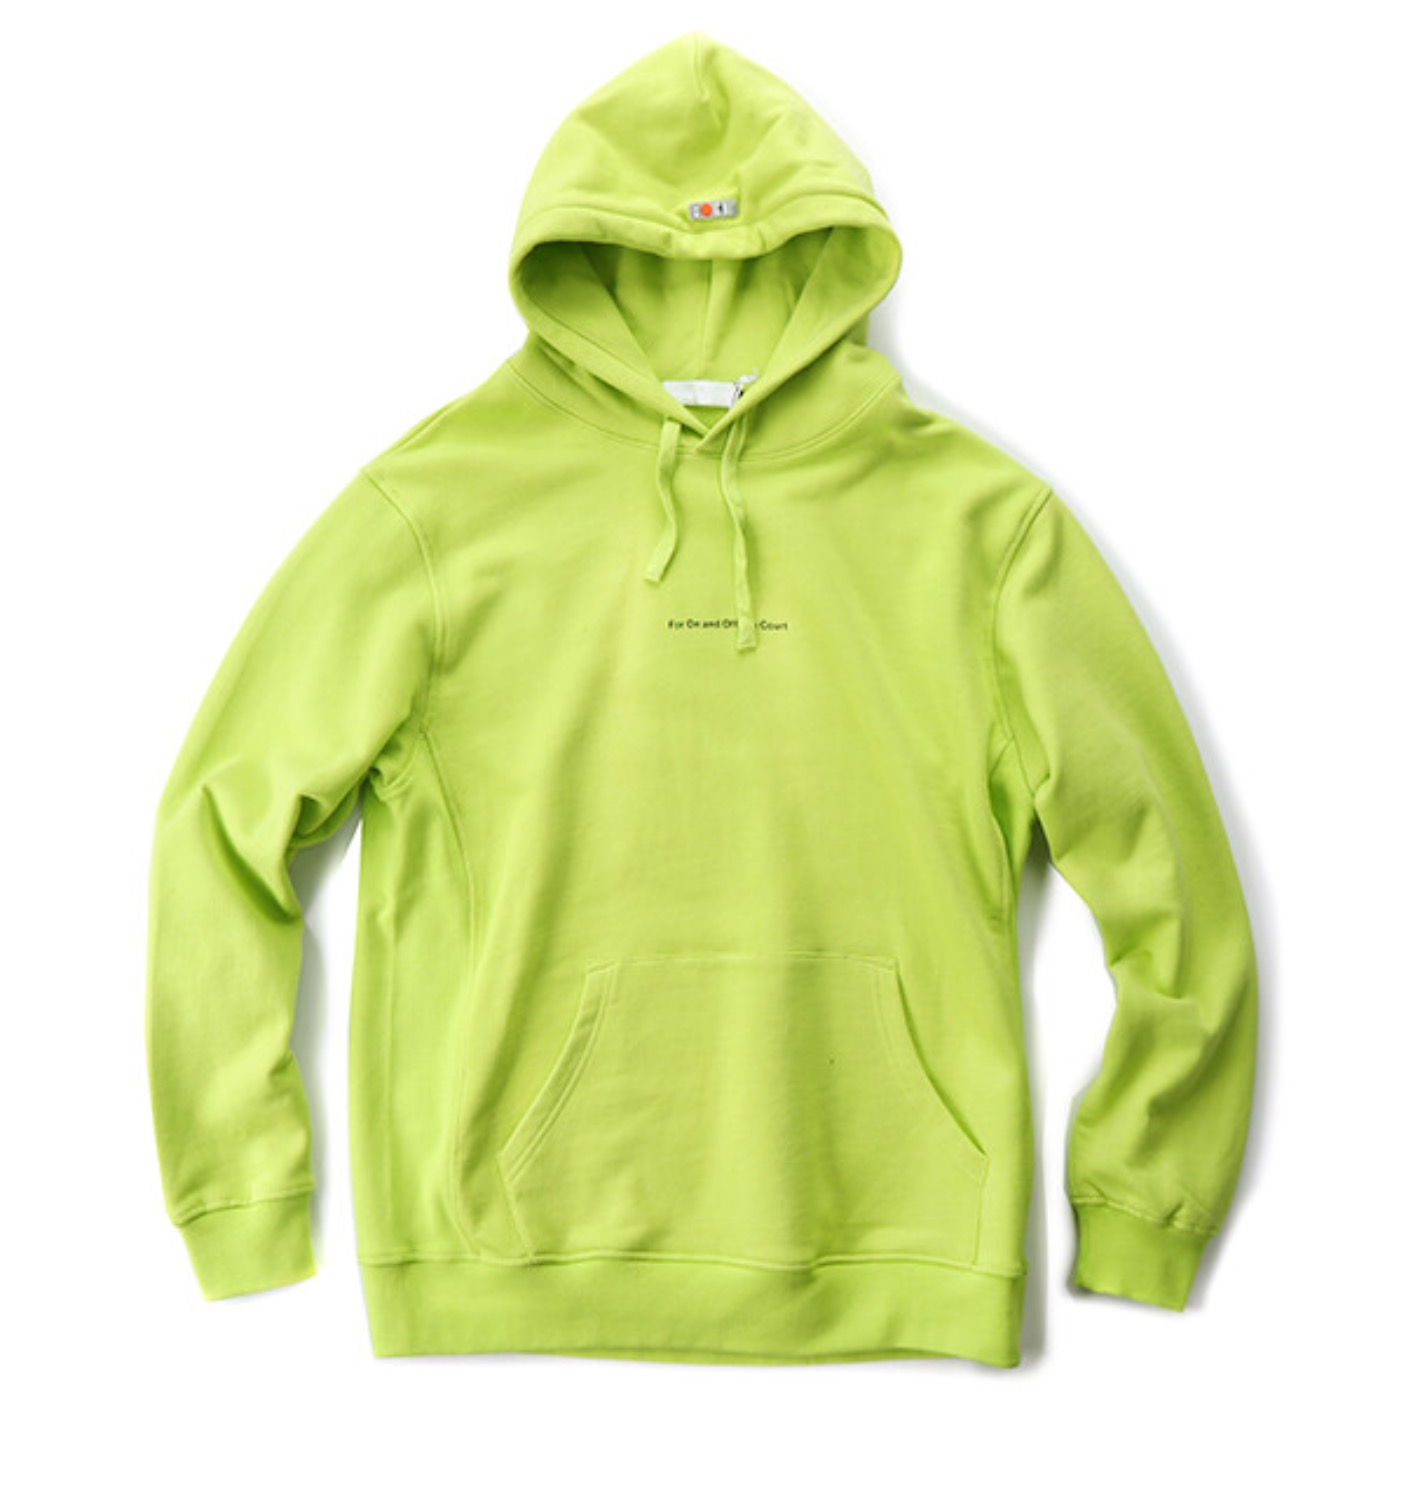 THE DIVER HOODIE LIME